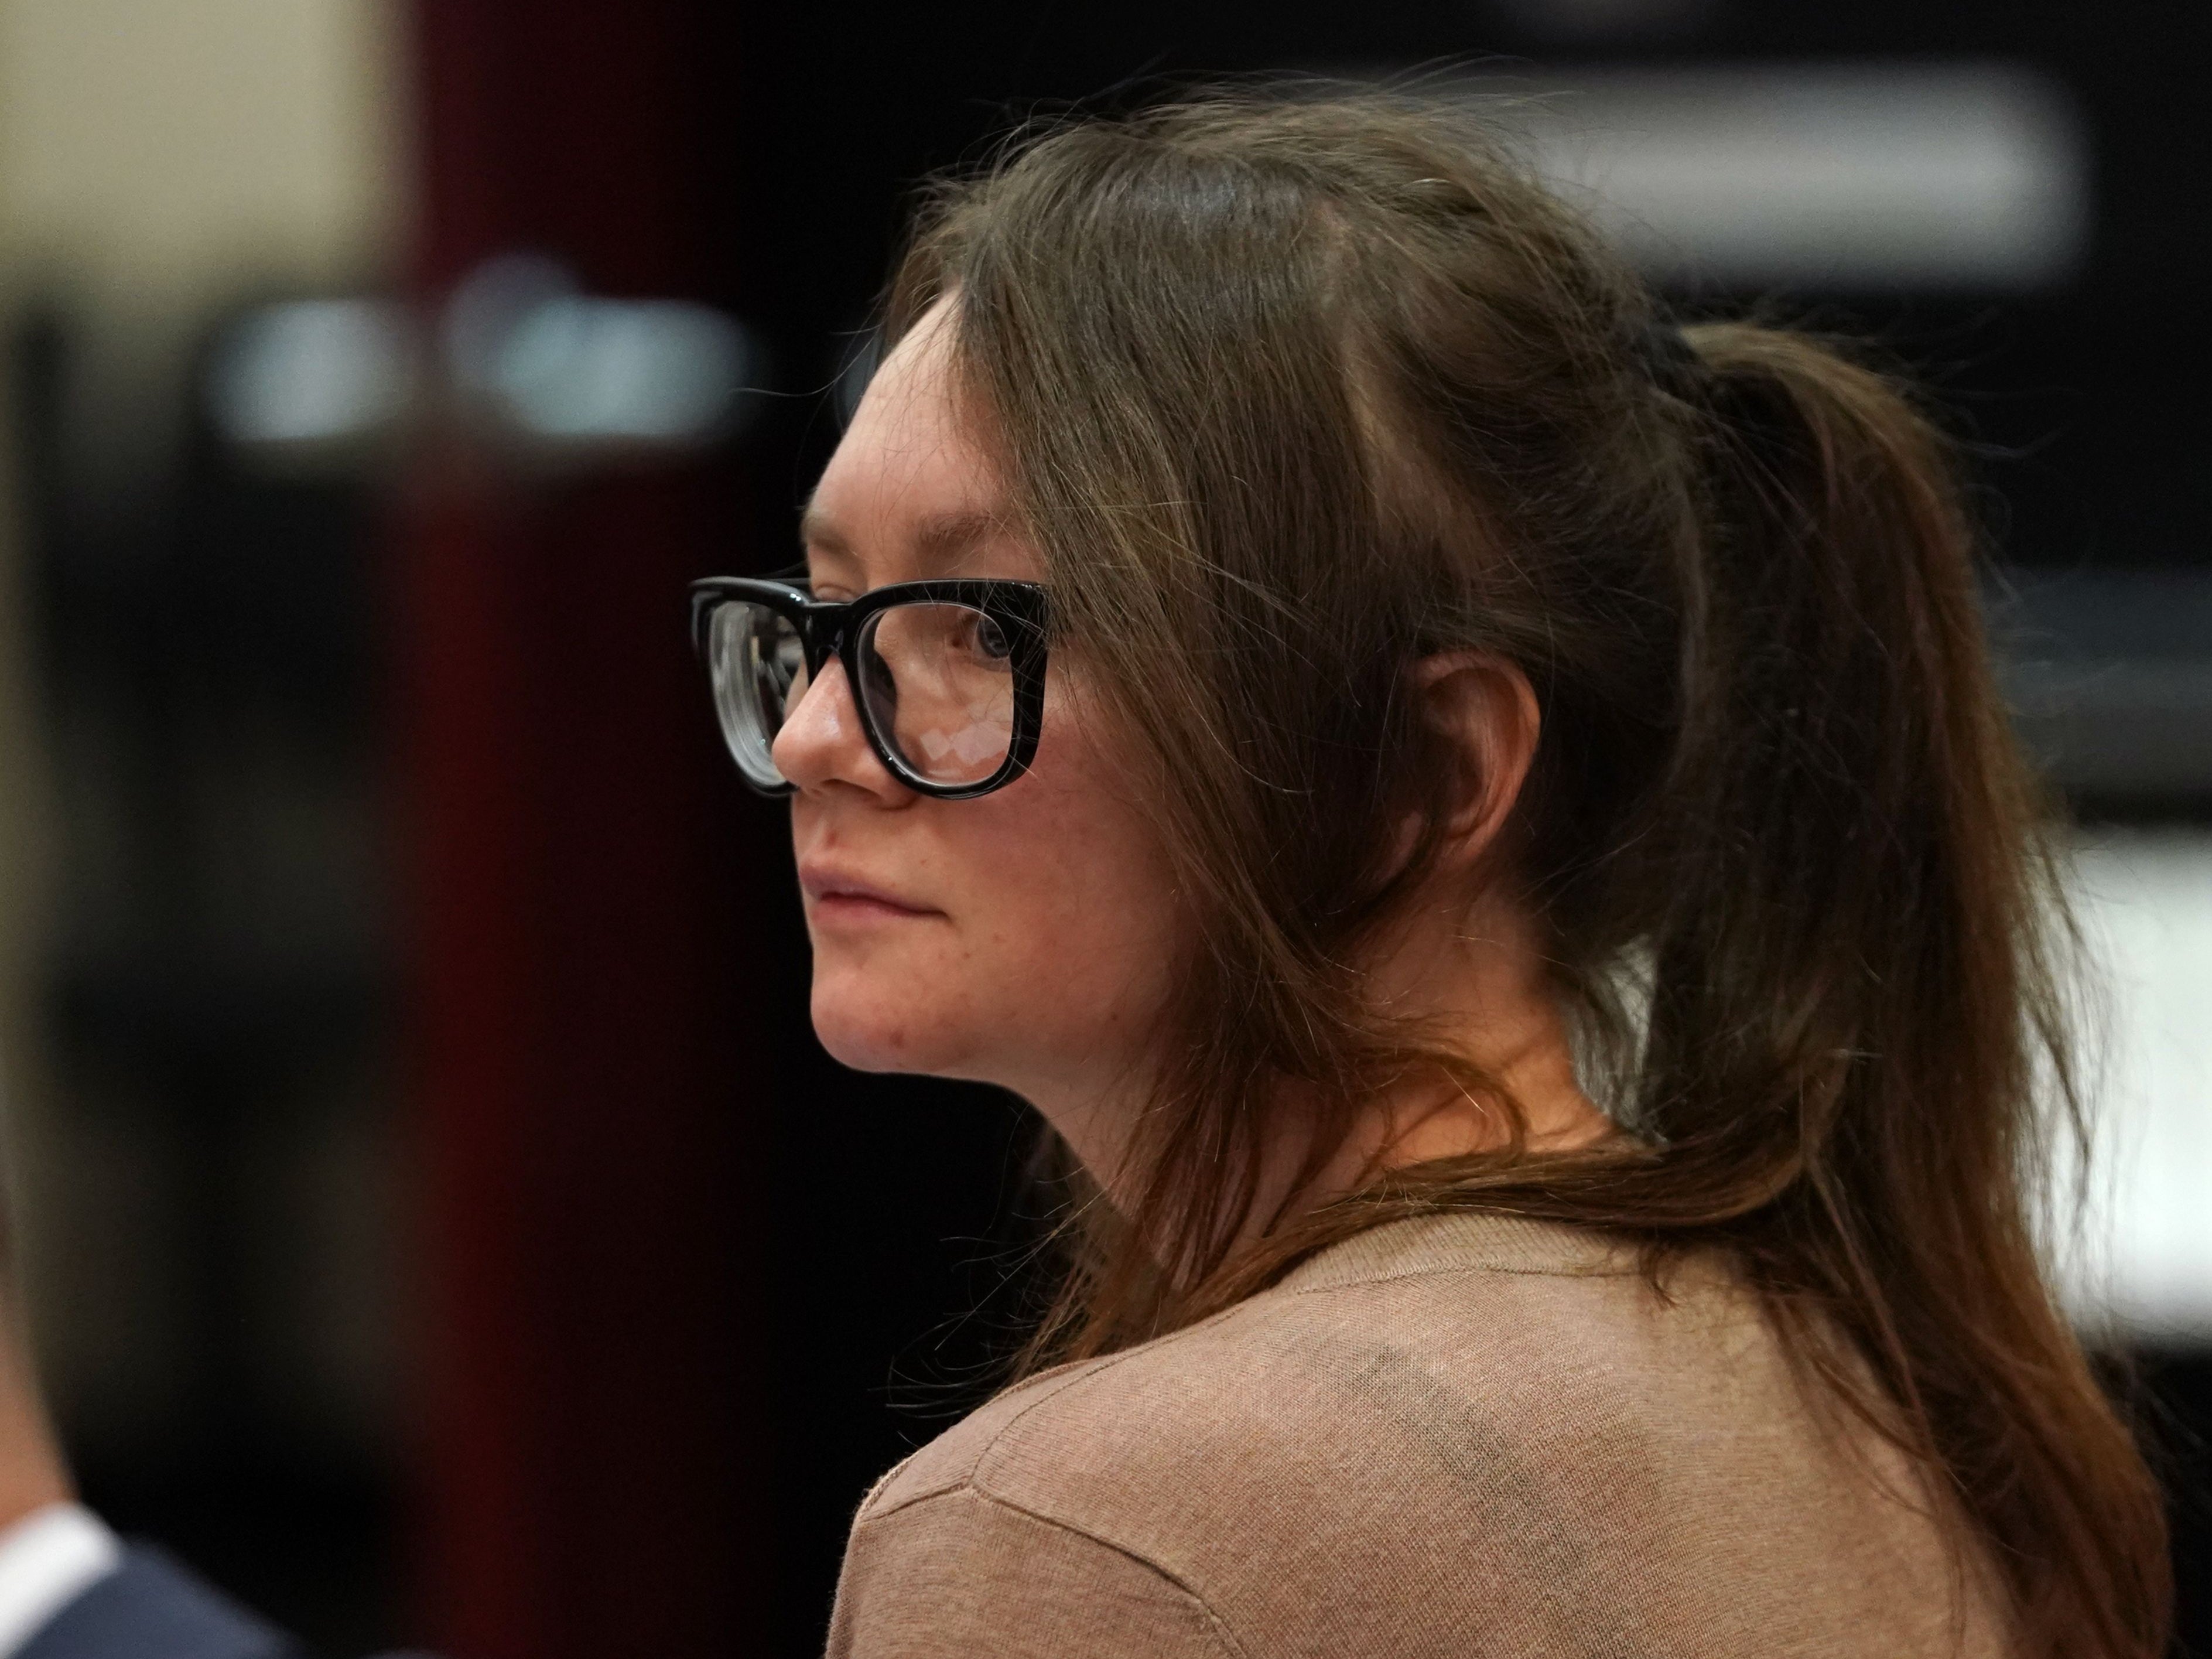 Anna Delvey was convicted of fraud and grand larceny in 2019